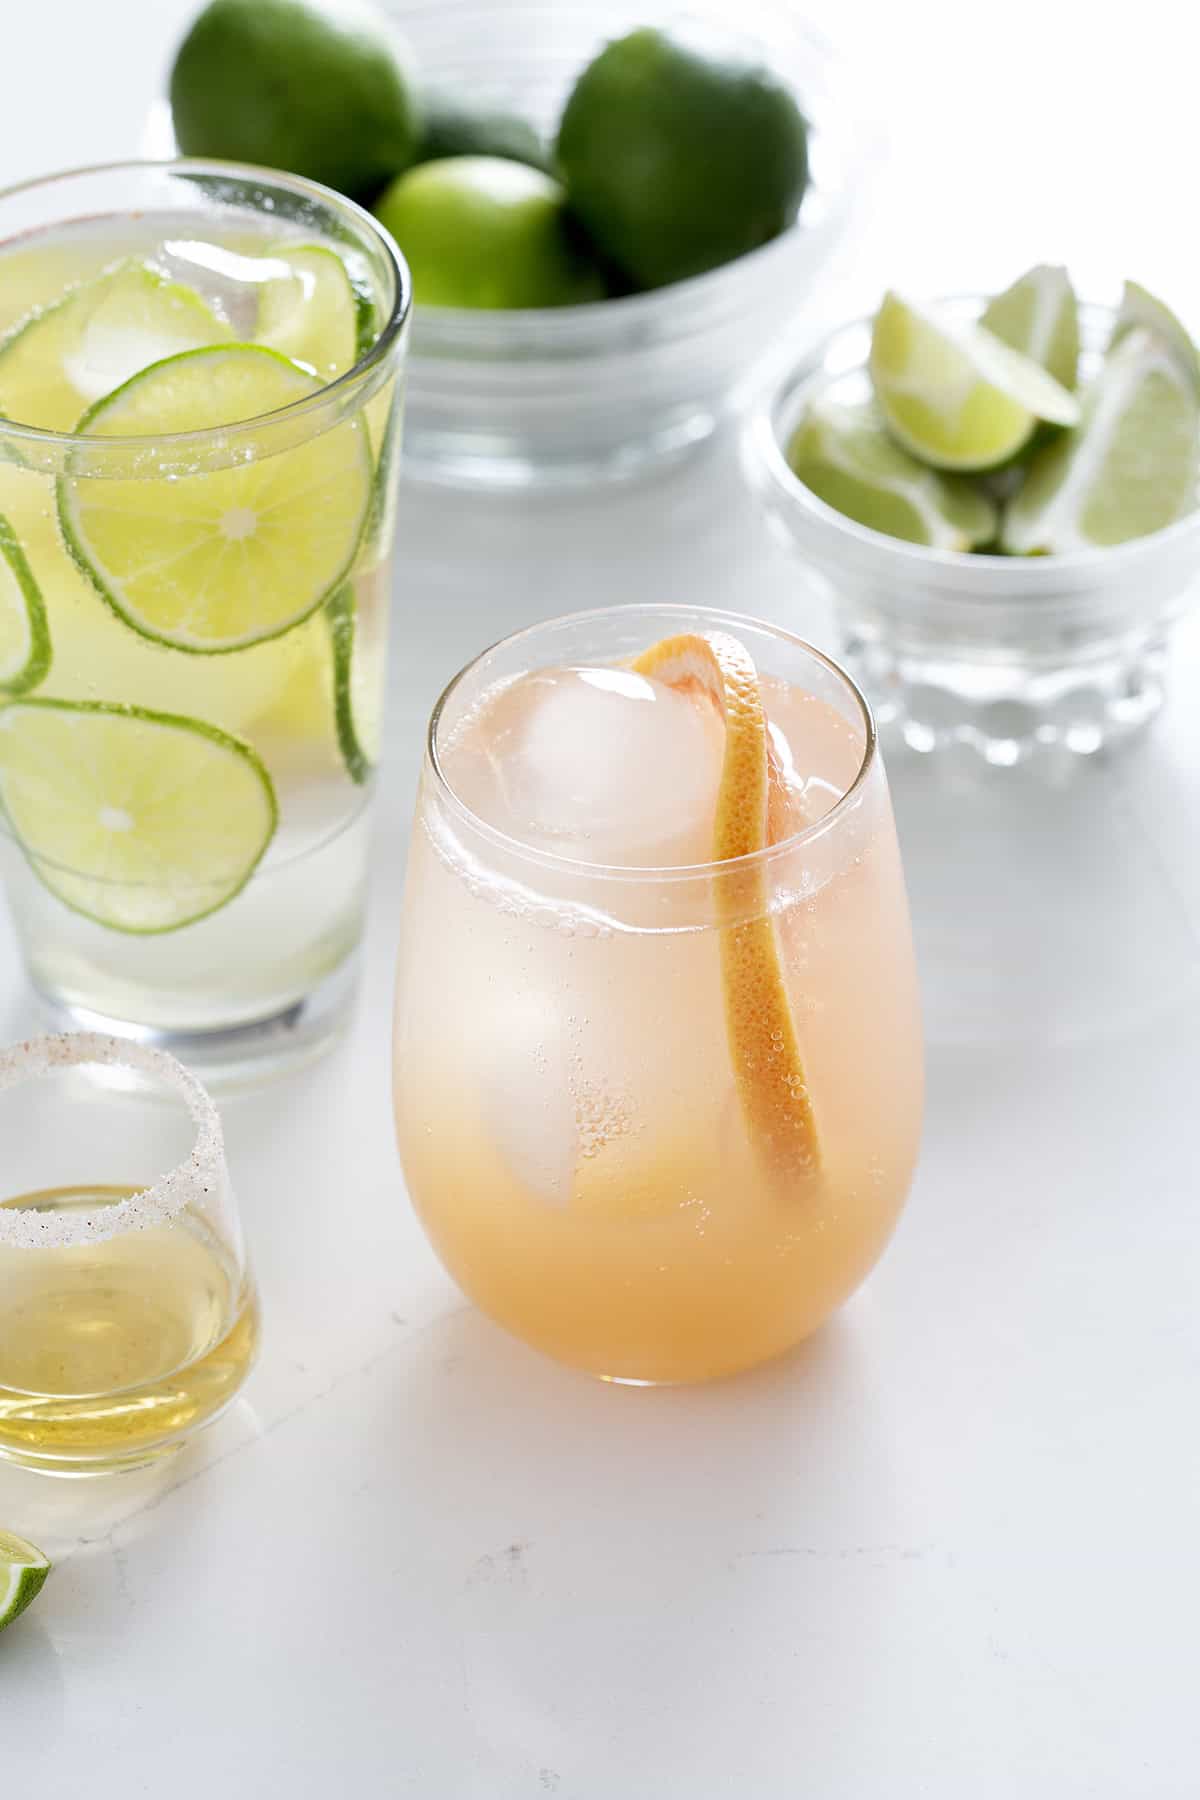 tequila drinks with lime and grapefruit garnishes